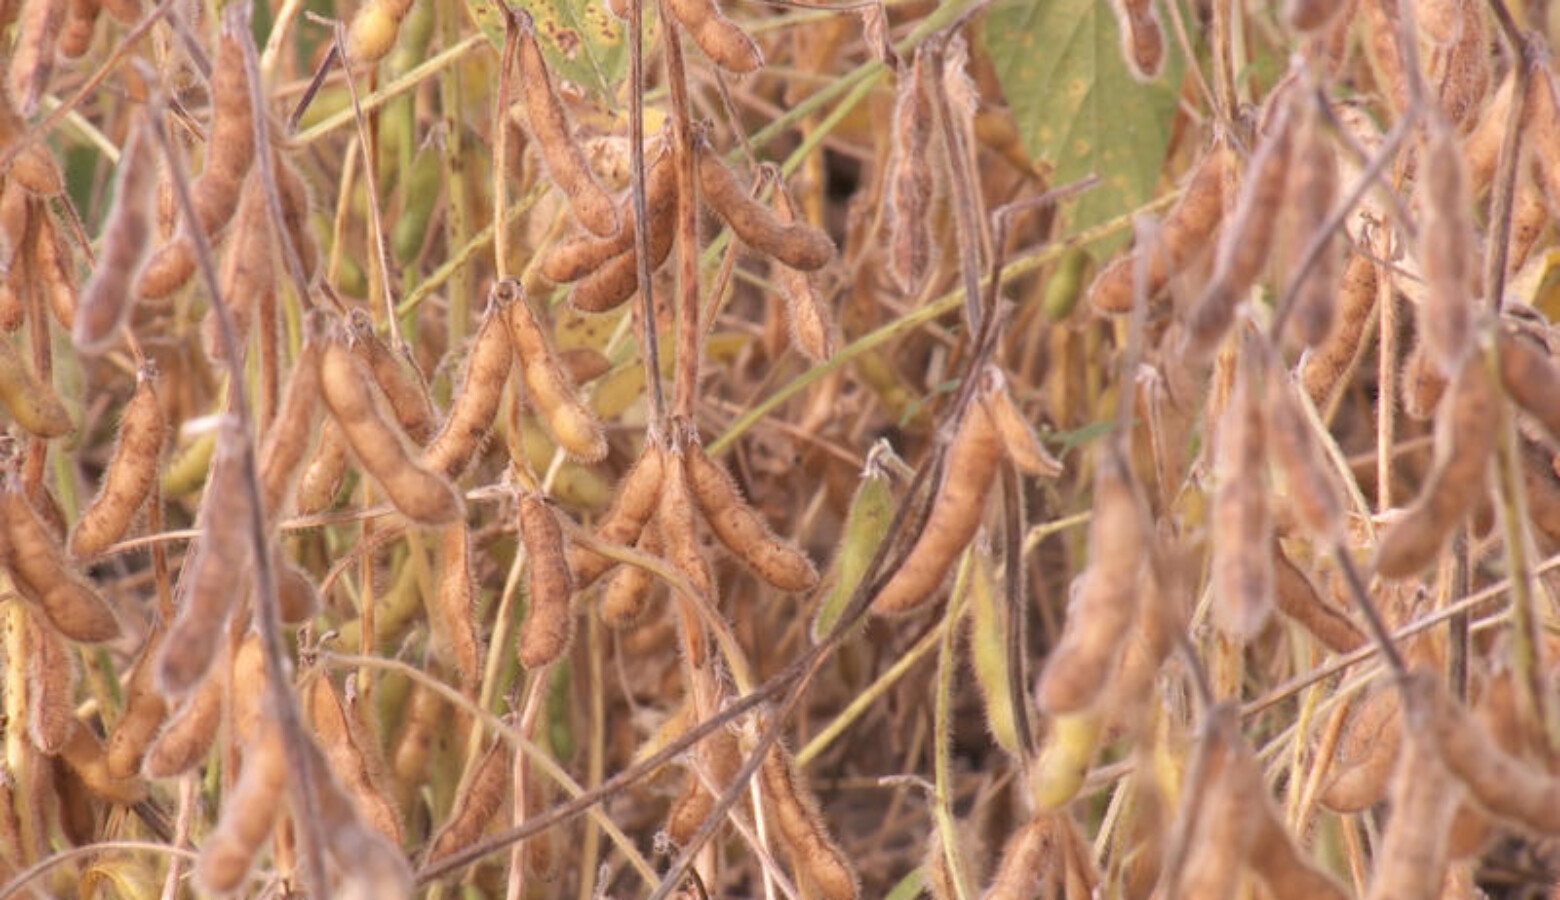 Dicamba can drift off of one soybean field that is resistant to the herbicide and damage a non-resistant field nearby. (FILE PHOTO: Seth Tackett/WTIU News)